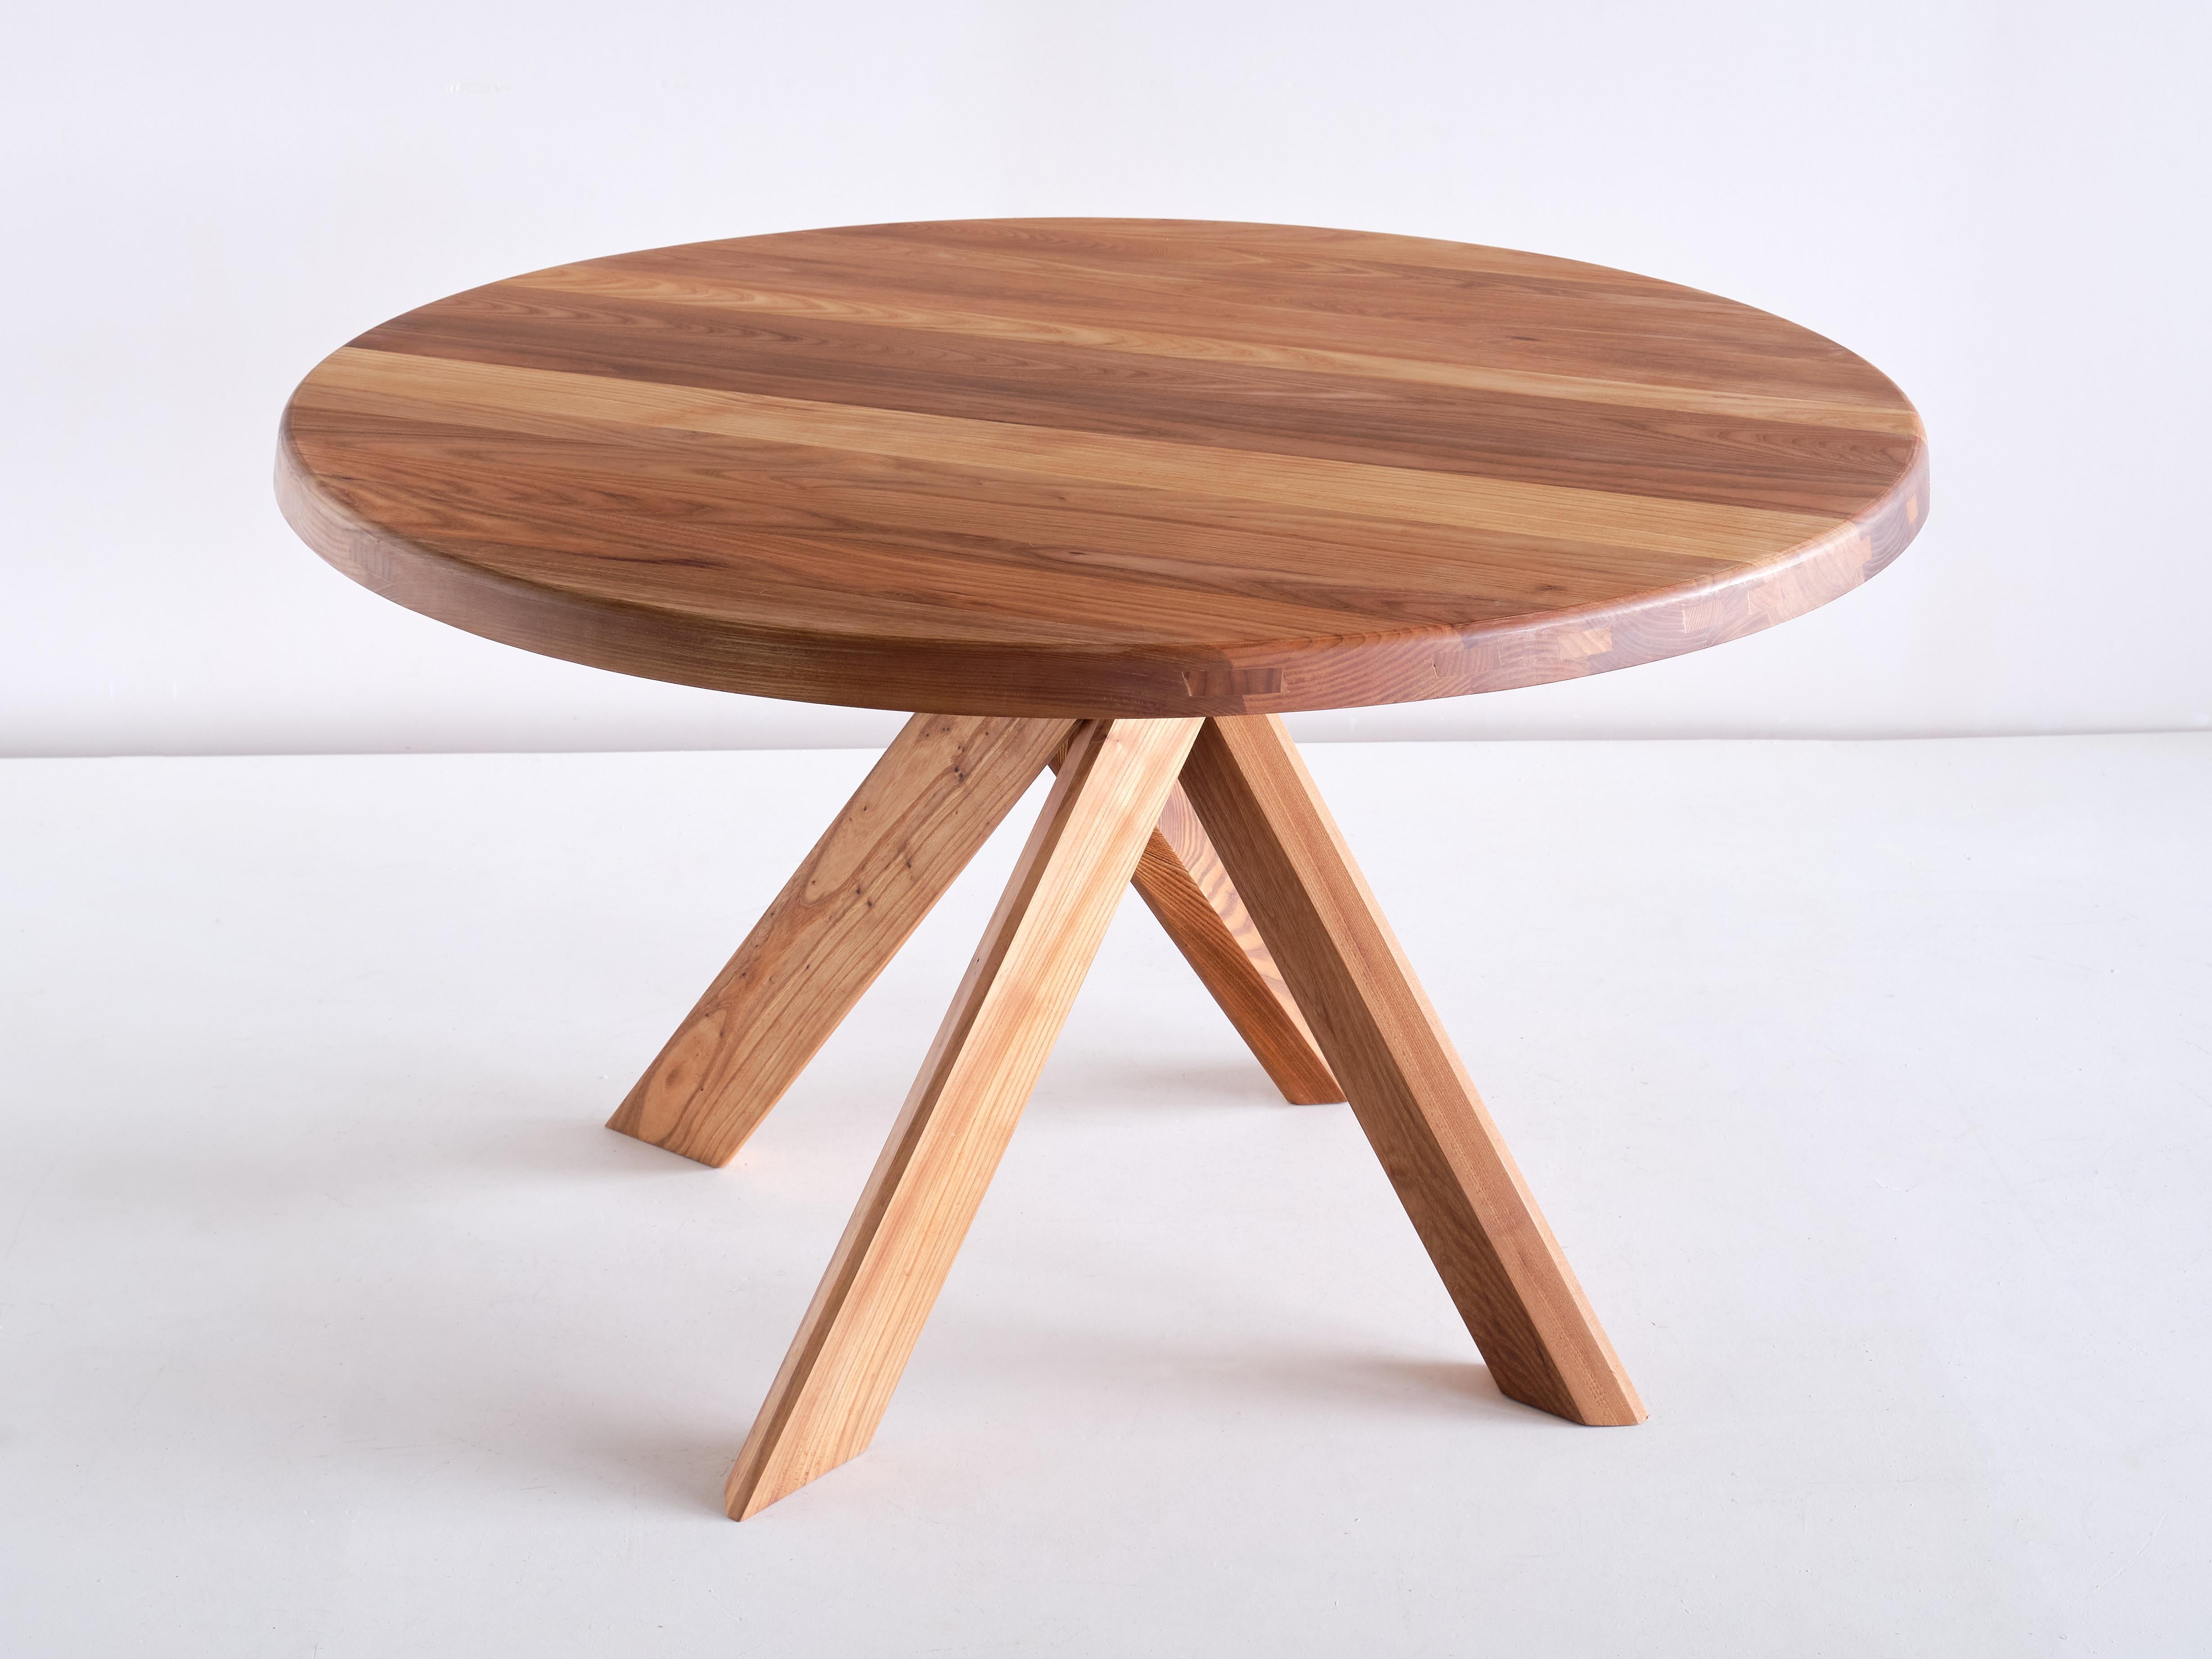 This iconic dining table is the model T21B designed by Pierre Chapo in 1973. The table is made of solid elm wood with a beautiful grain. Striking four legged cross base and round table top. 

This new table was made by Chapo Creation, now run by